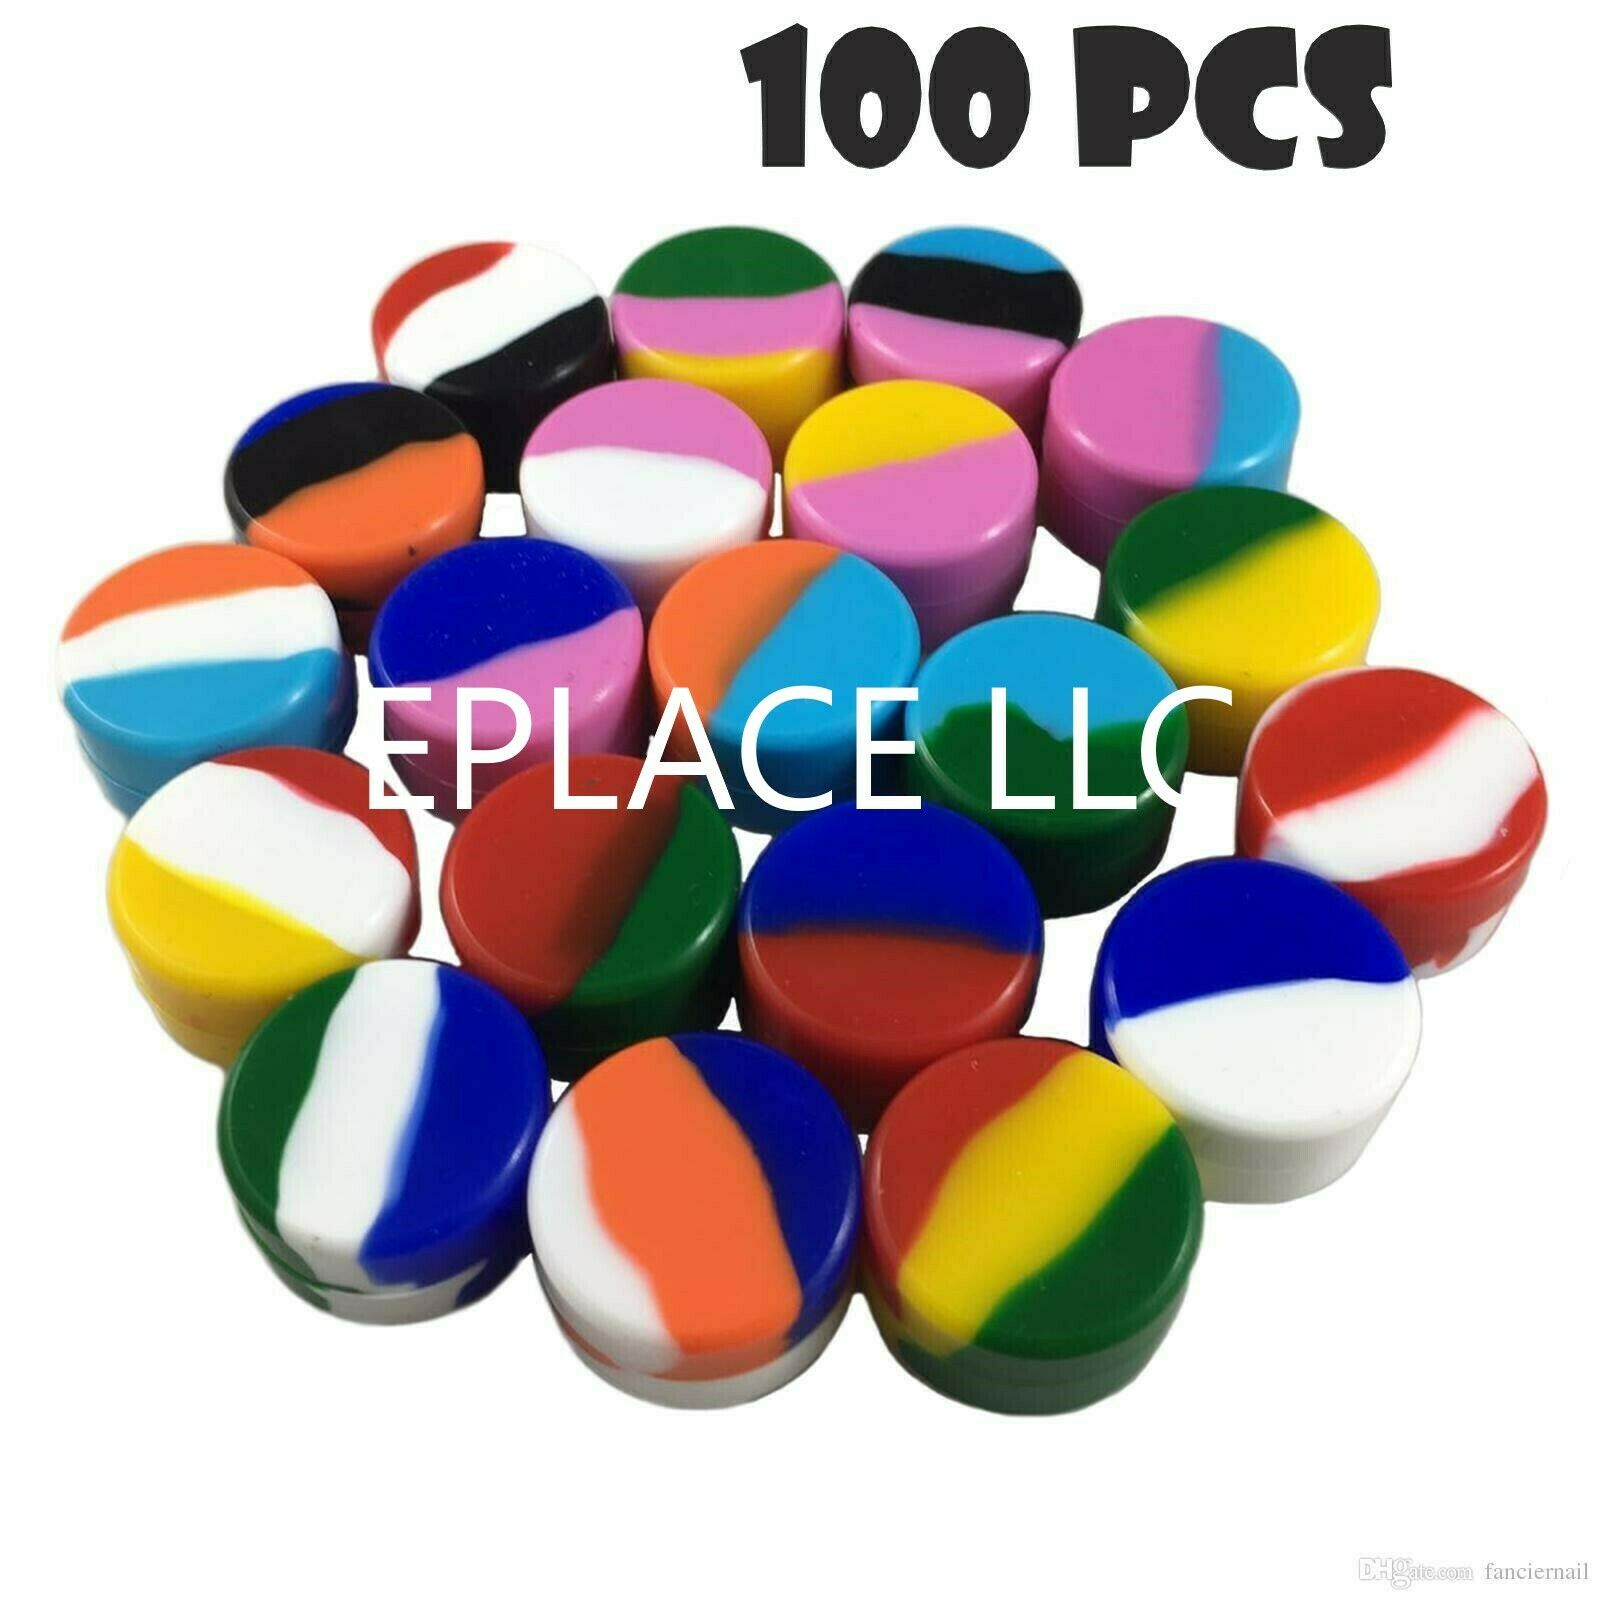 100 5ml Silicone Wax Jar Containers Nonstick Mixed Color New 5 Ml Wholesale Lot